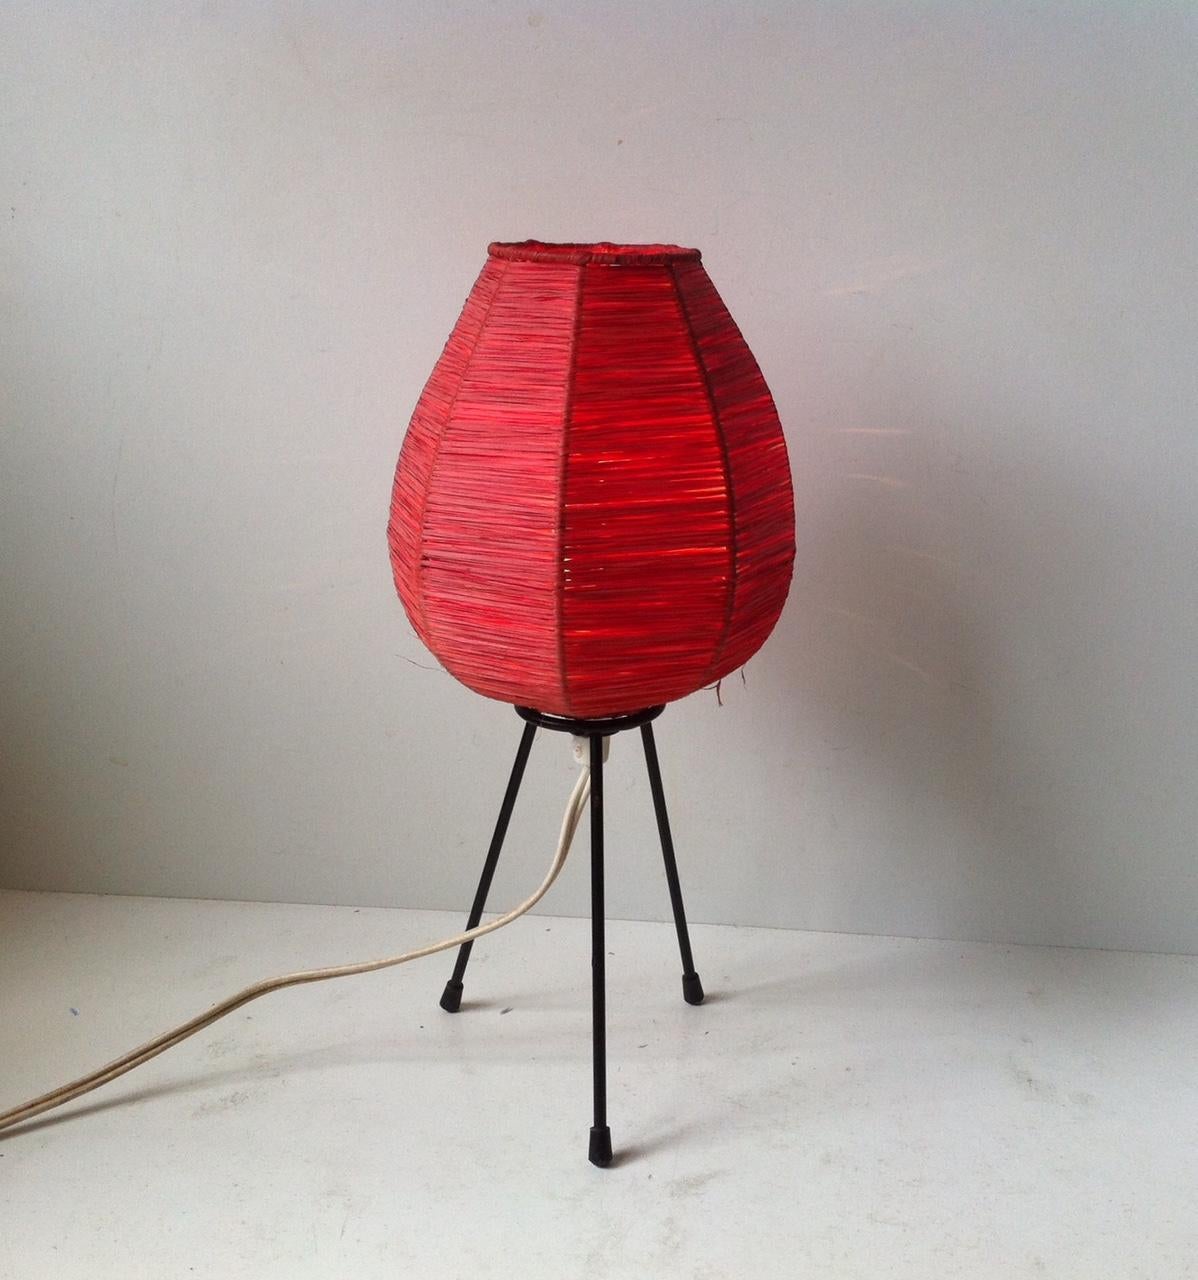 Small and light tri stand table light composed of a red paper thread shade and lacquered steel body. It was made in Scandinavia during the 1970s in a style reminiscent of Isamu Noguchi.